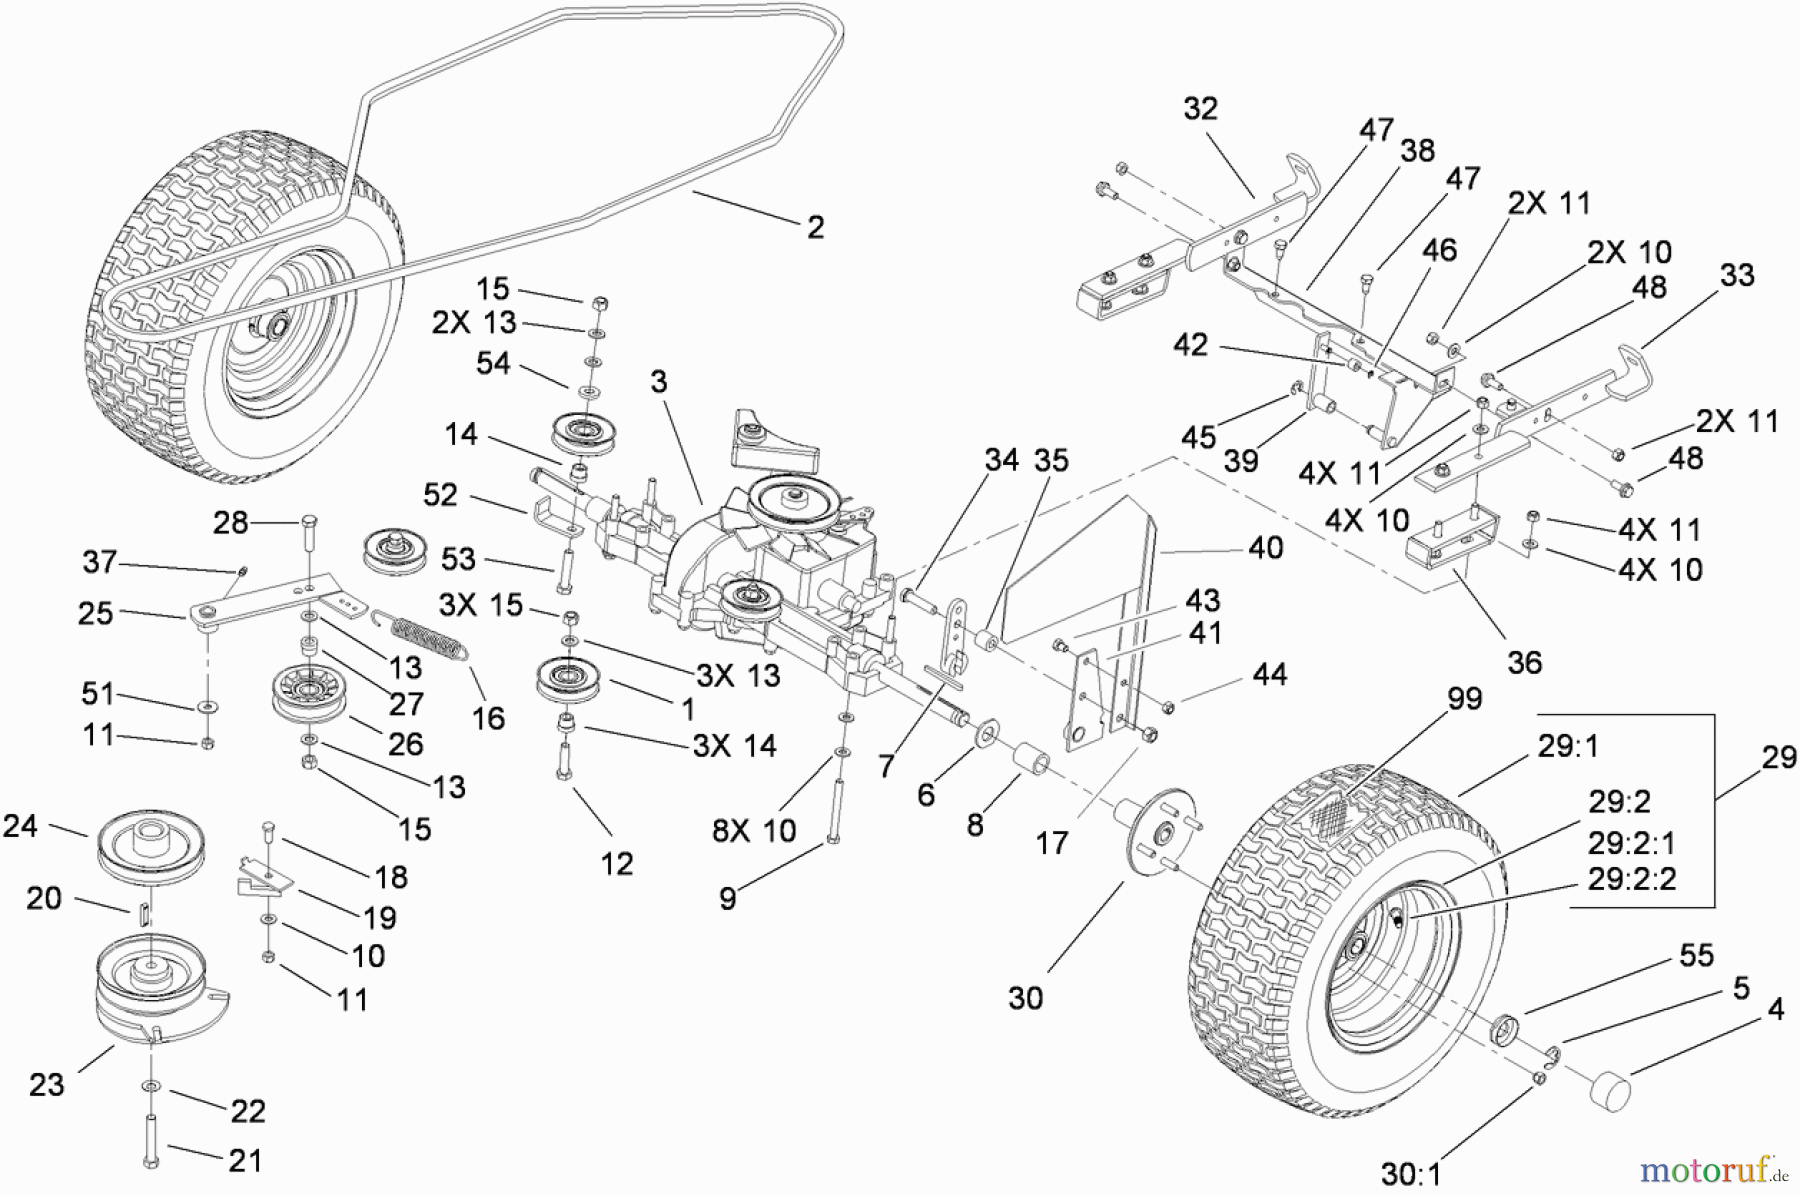  Toro Neu Mowers, Lawn & Garden Tractor Seite 1 74592 (DH 220) - Toro DH 220 Lawn Tractor, 2009 (290000001-290999999) TRANSMISSION ASSEMBLY